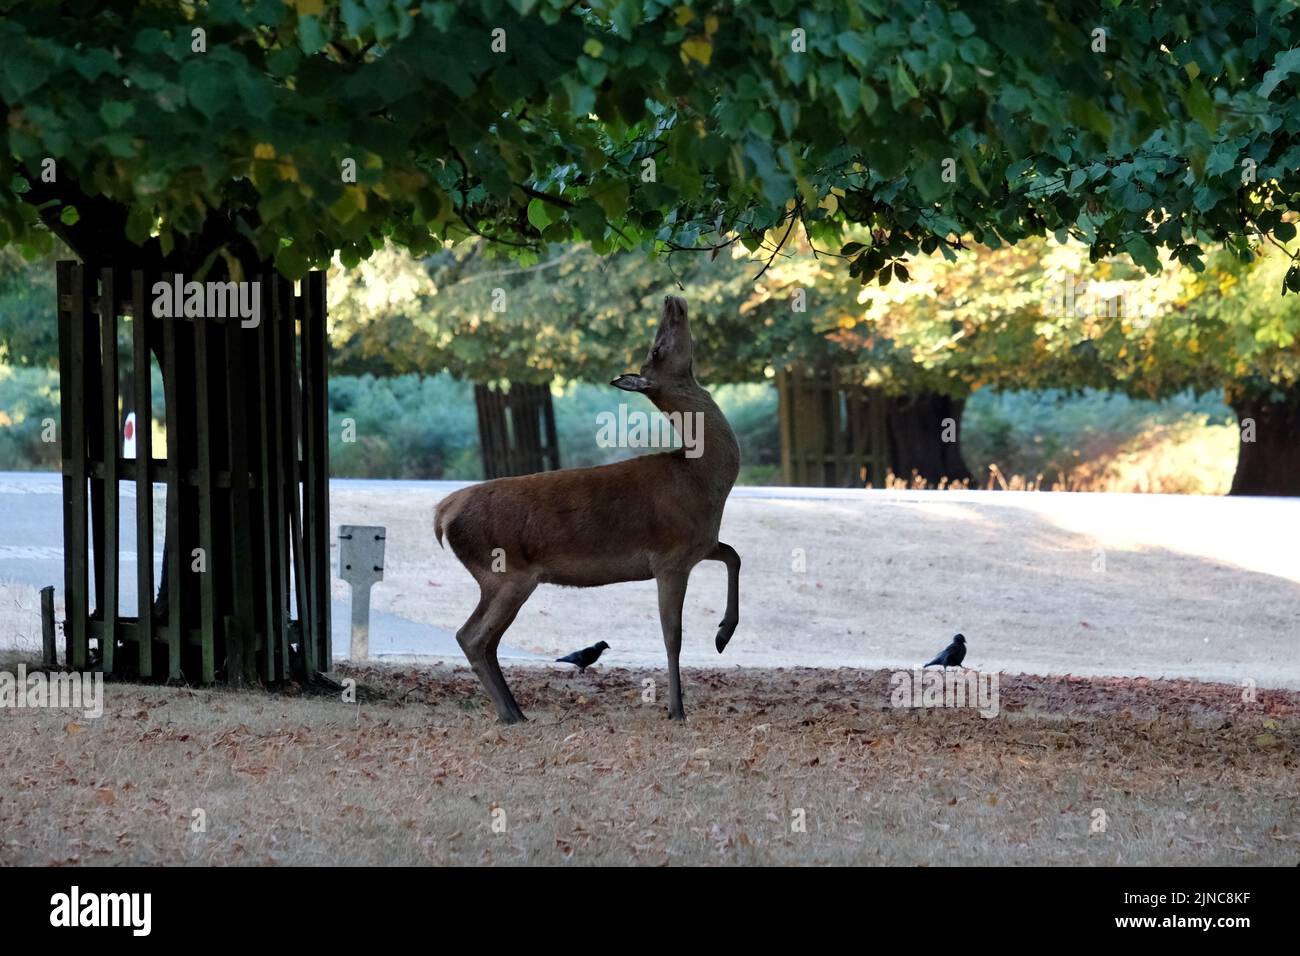 London, UK, 10th Aug, 2022.  A red deer looks at tree leaves to feed on. After continuing hot, sunny conditions, with the driest July on record has left the park with large areas of yellowing grass. An Amber Extreme heat warning was issued by the Met Office this week as temperatures are expected to reach mid-30 degrees celsius.  Credit: Eleventh Hour Photography/Alamy Live News Stock Photo